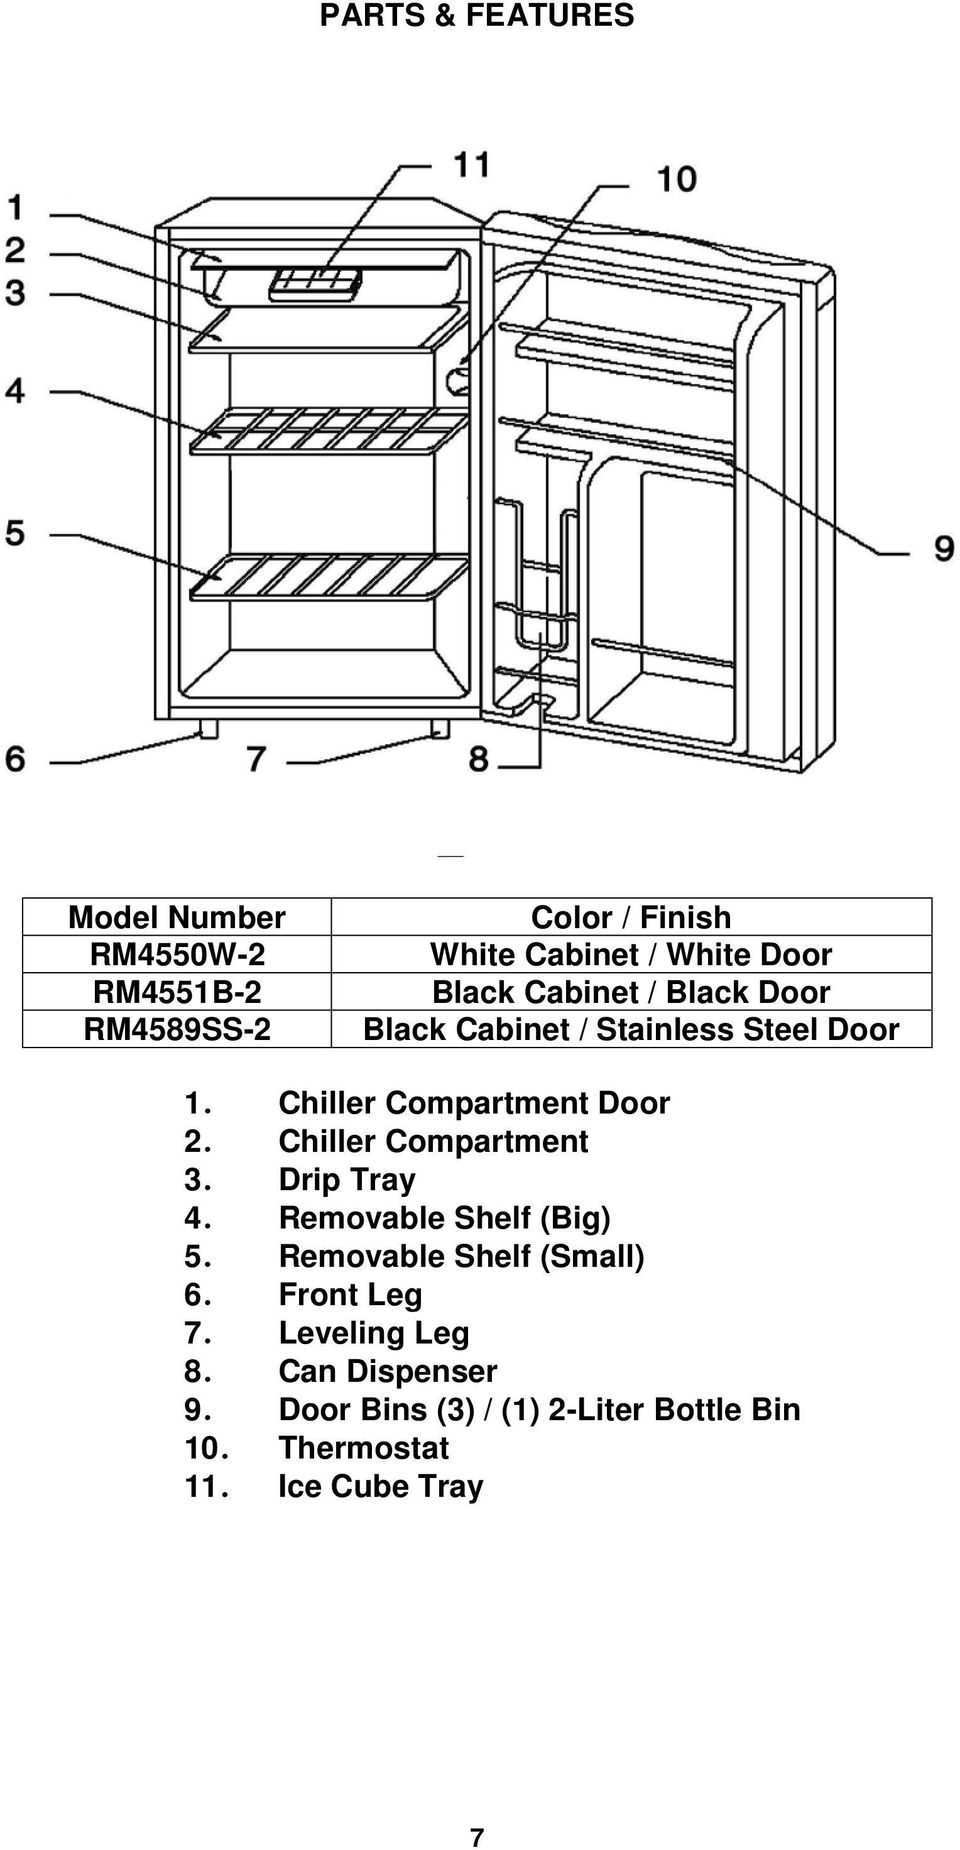 Chiller Compartment 3. Drip Tray 4. Removable Shelf (Big) 5. Removable Shelf (Small) 6. Front Leg 7.